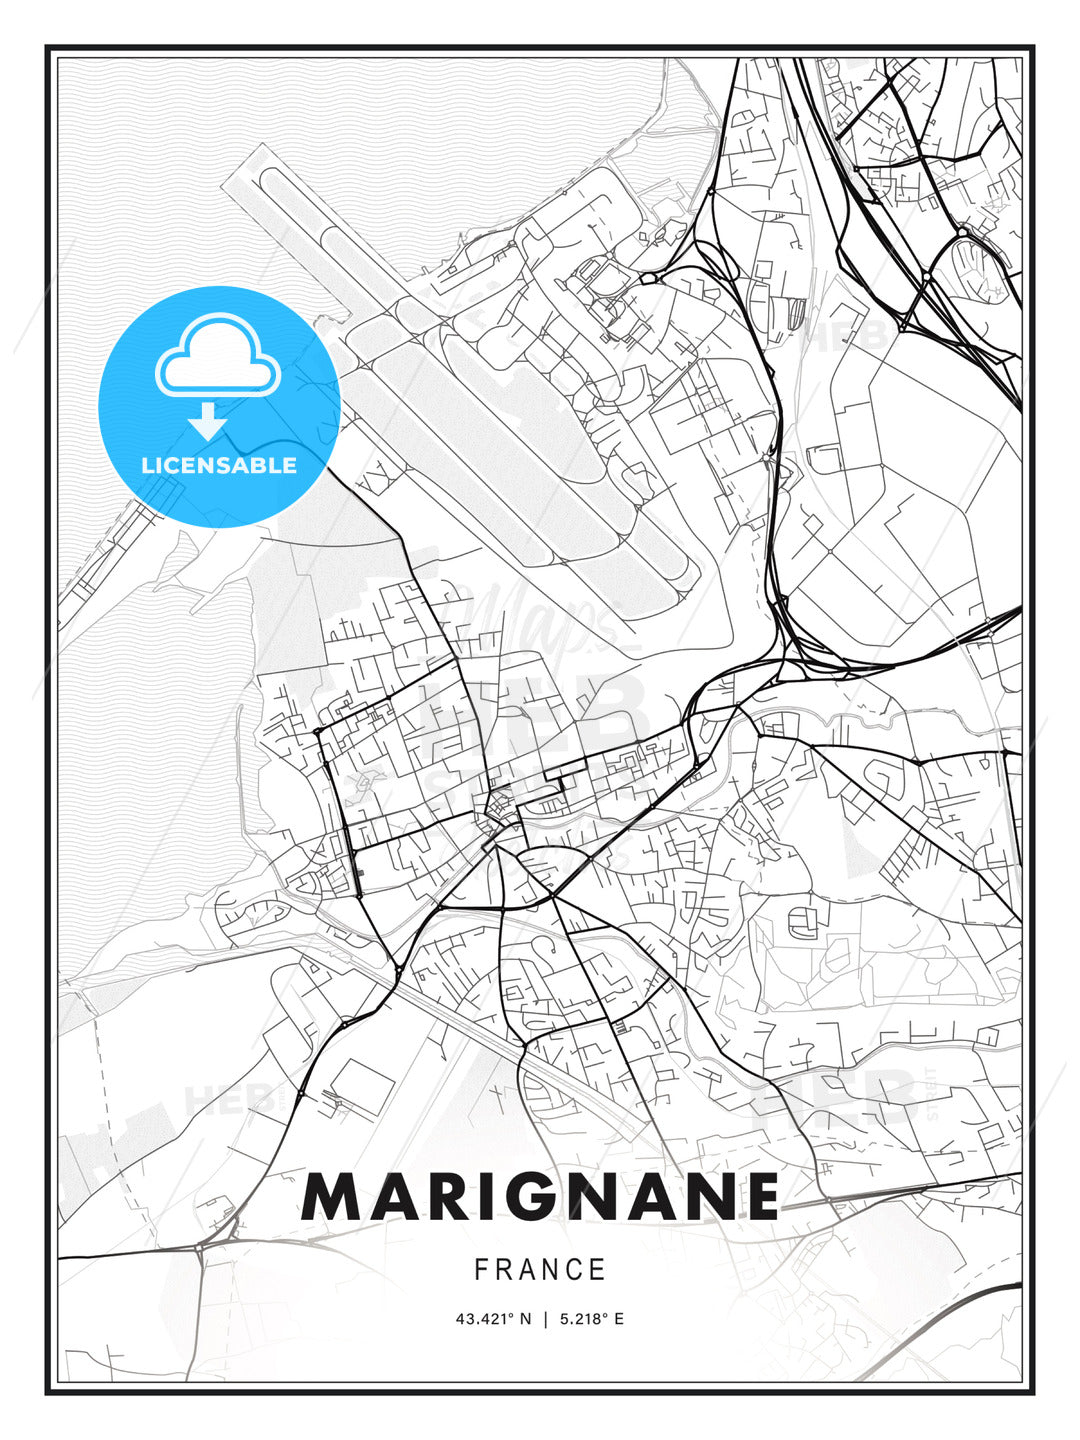 Marignane, France, Modern Print Template in Various Formats - HEBSTREITS Sketches